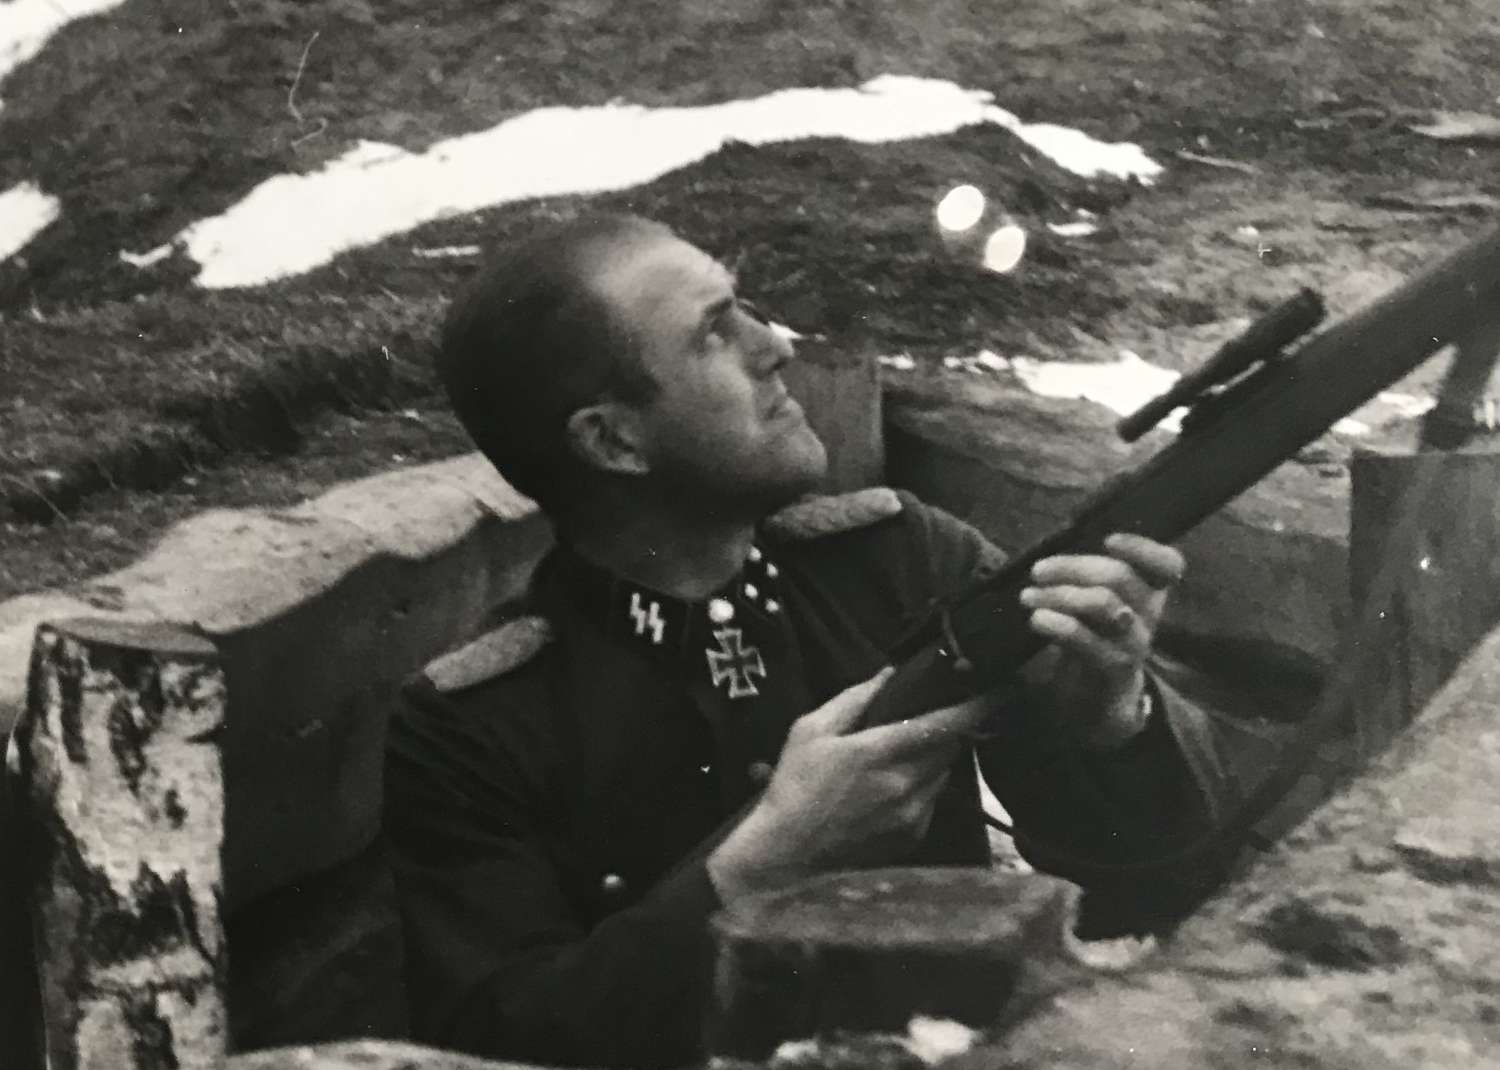 Press photo of Waffen SS officer with snipers rifle dated, 1944